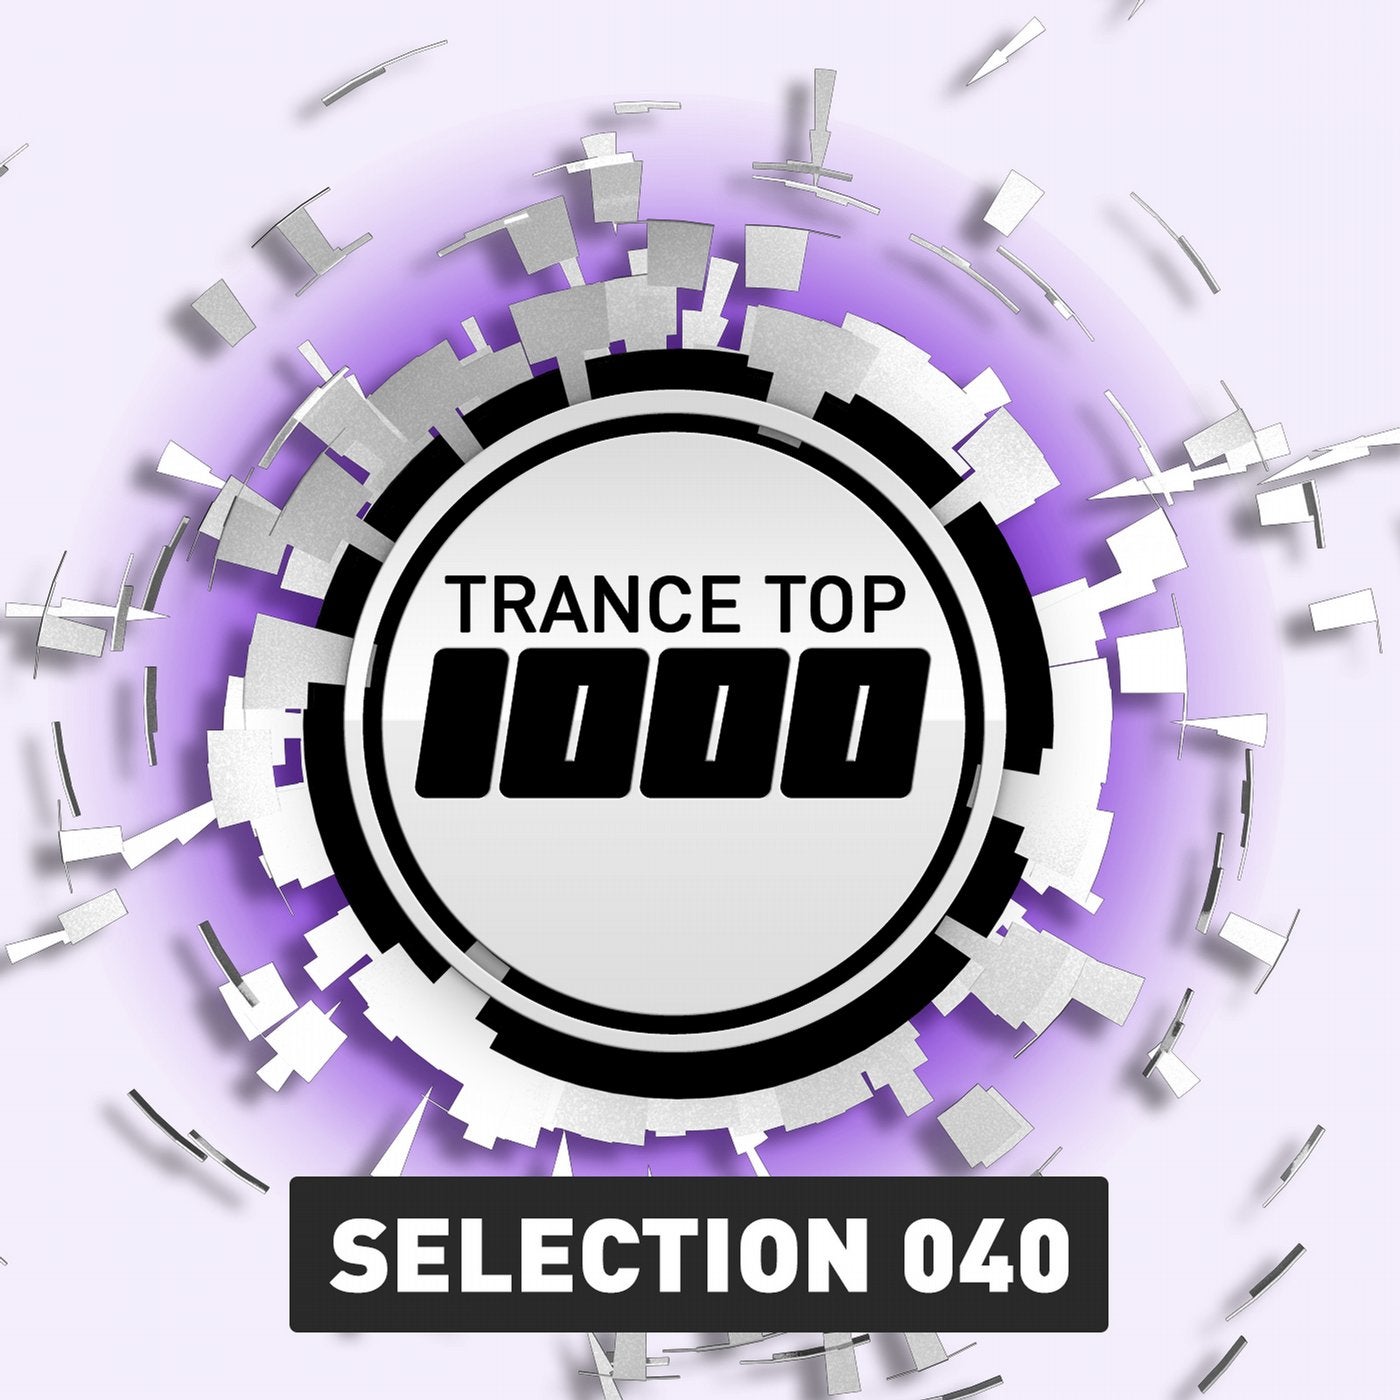 Trance Top 1000 Selection, Vol. 40 - Extended Versions